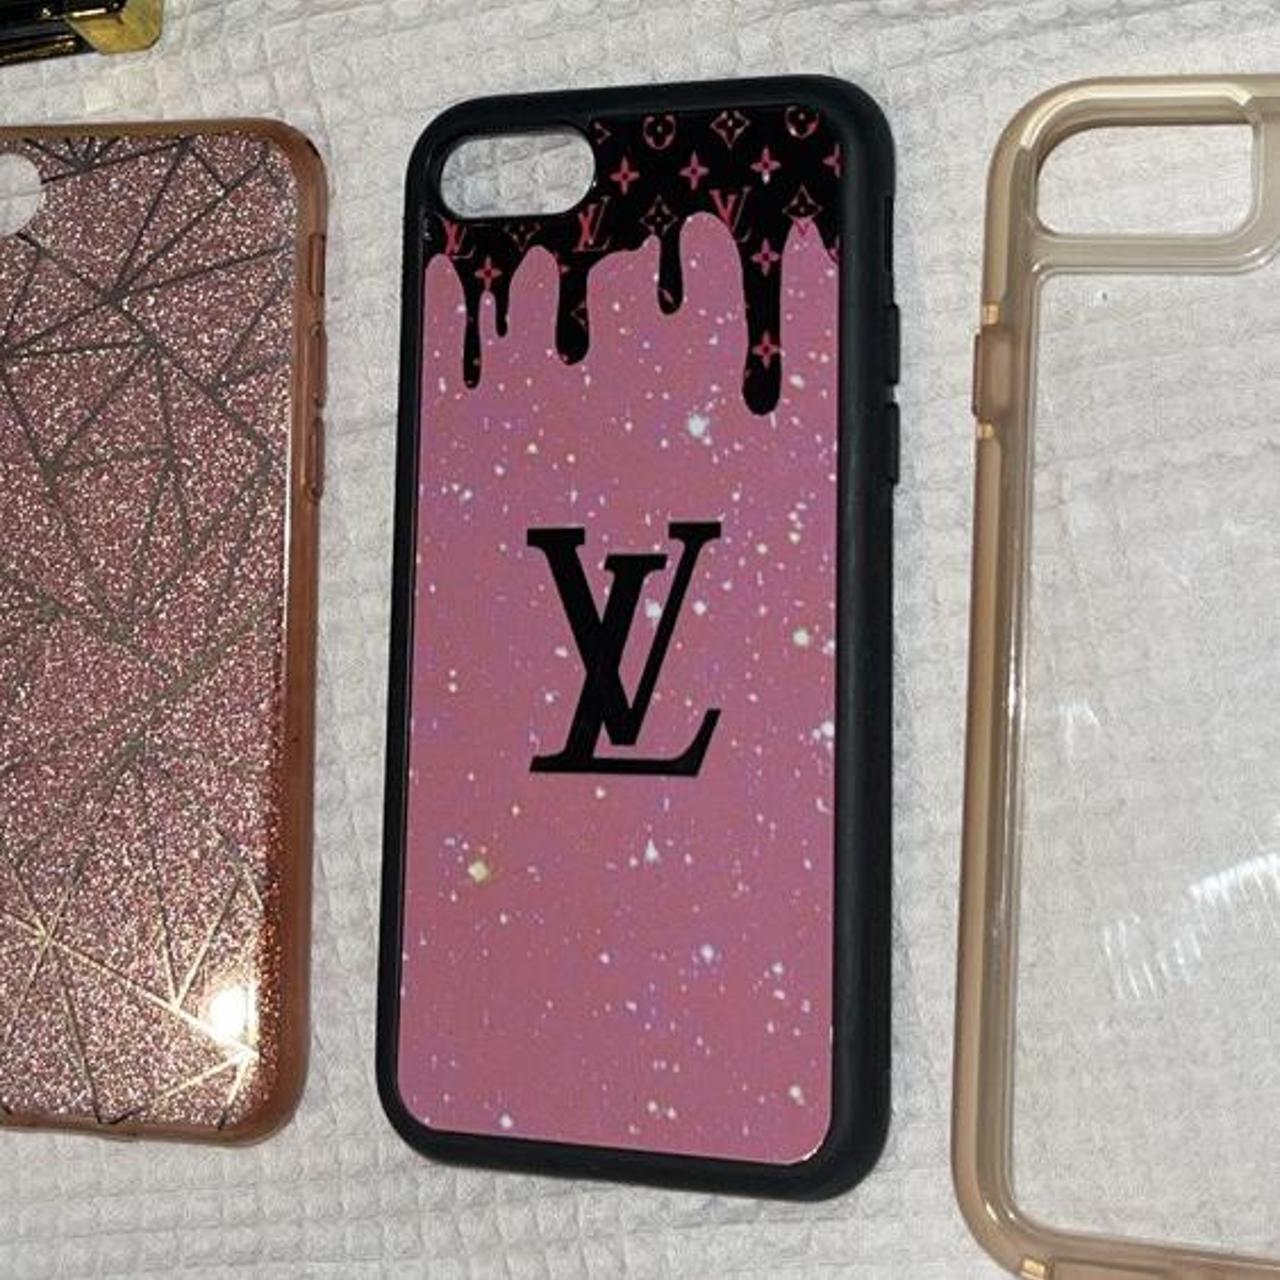 How about this pink LV case 😍 #phonecase #iphonecase #luxuryphonecase